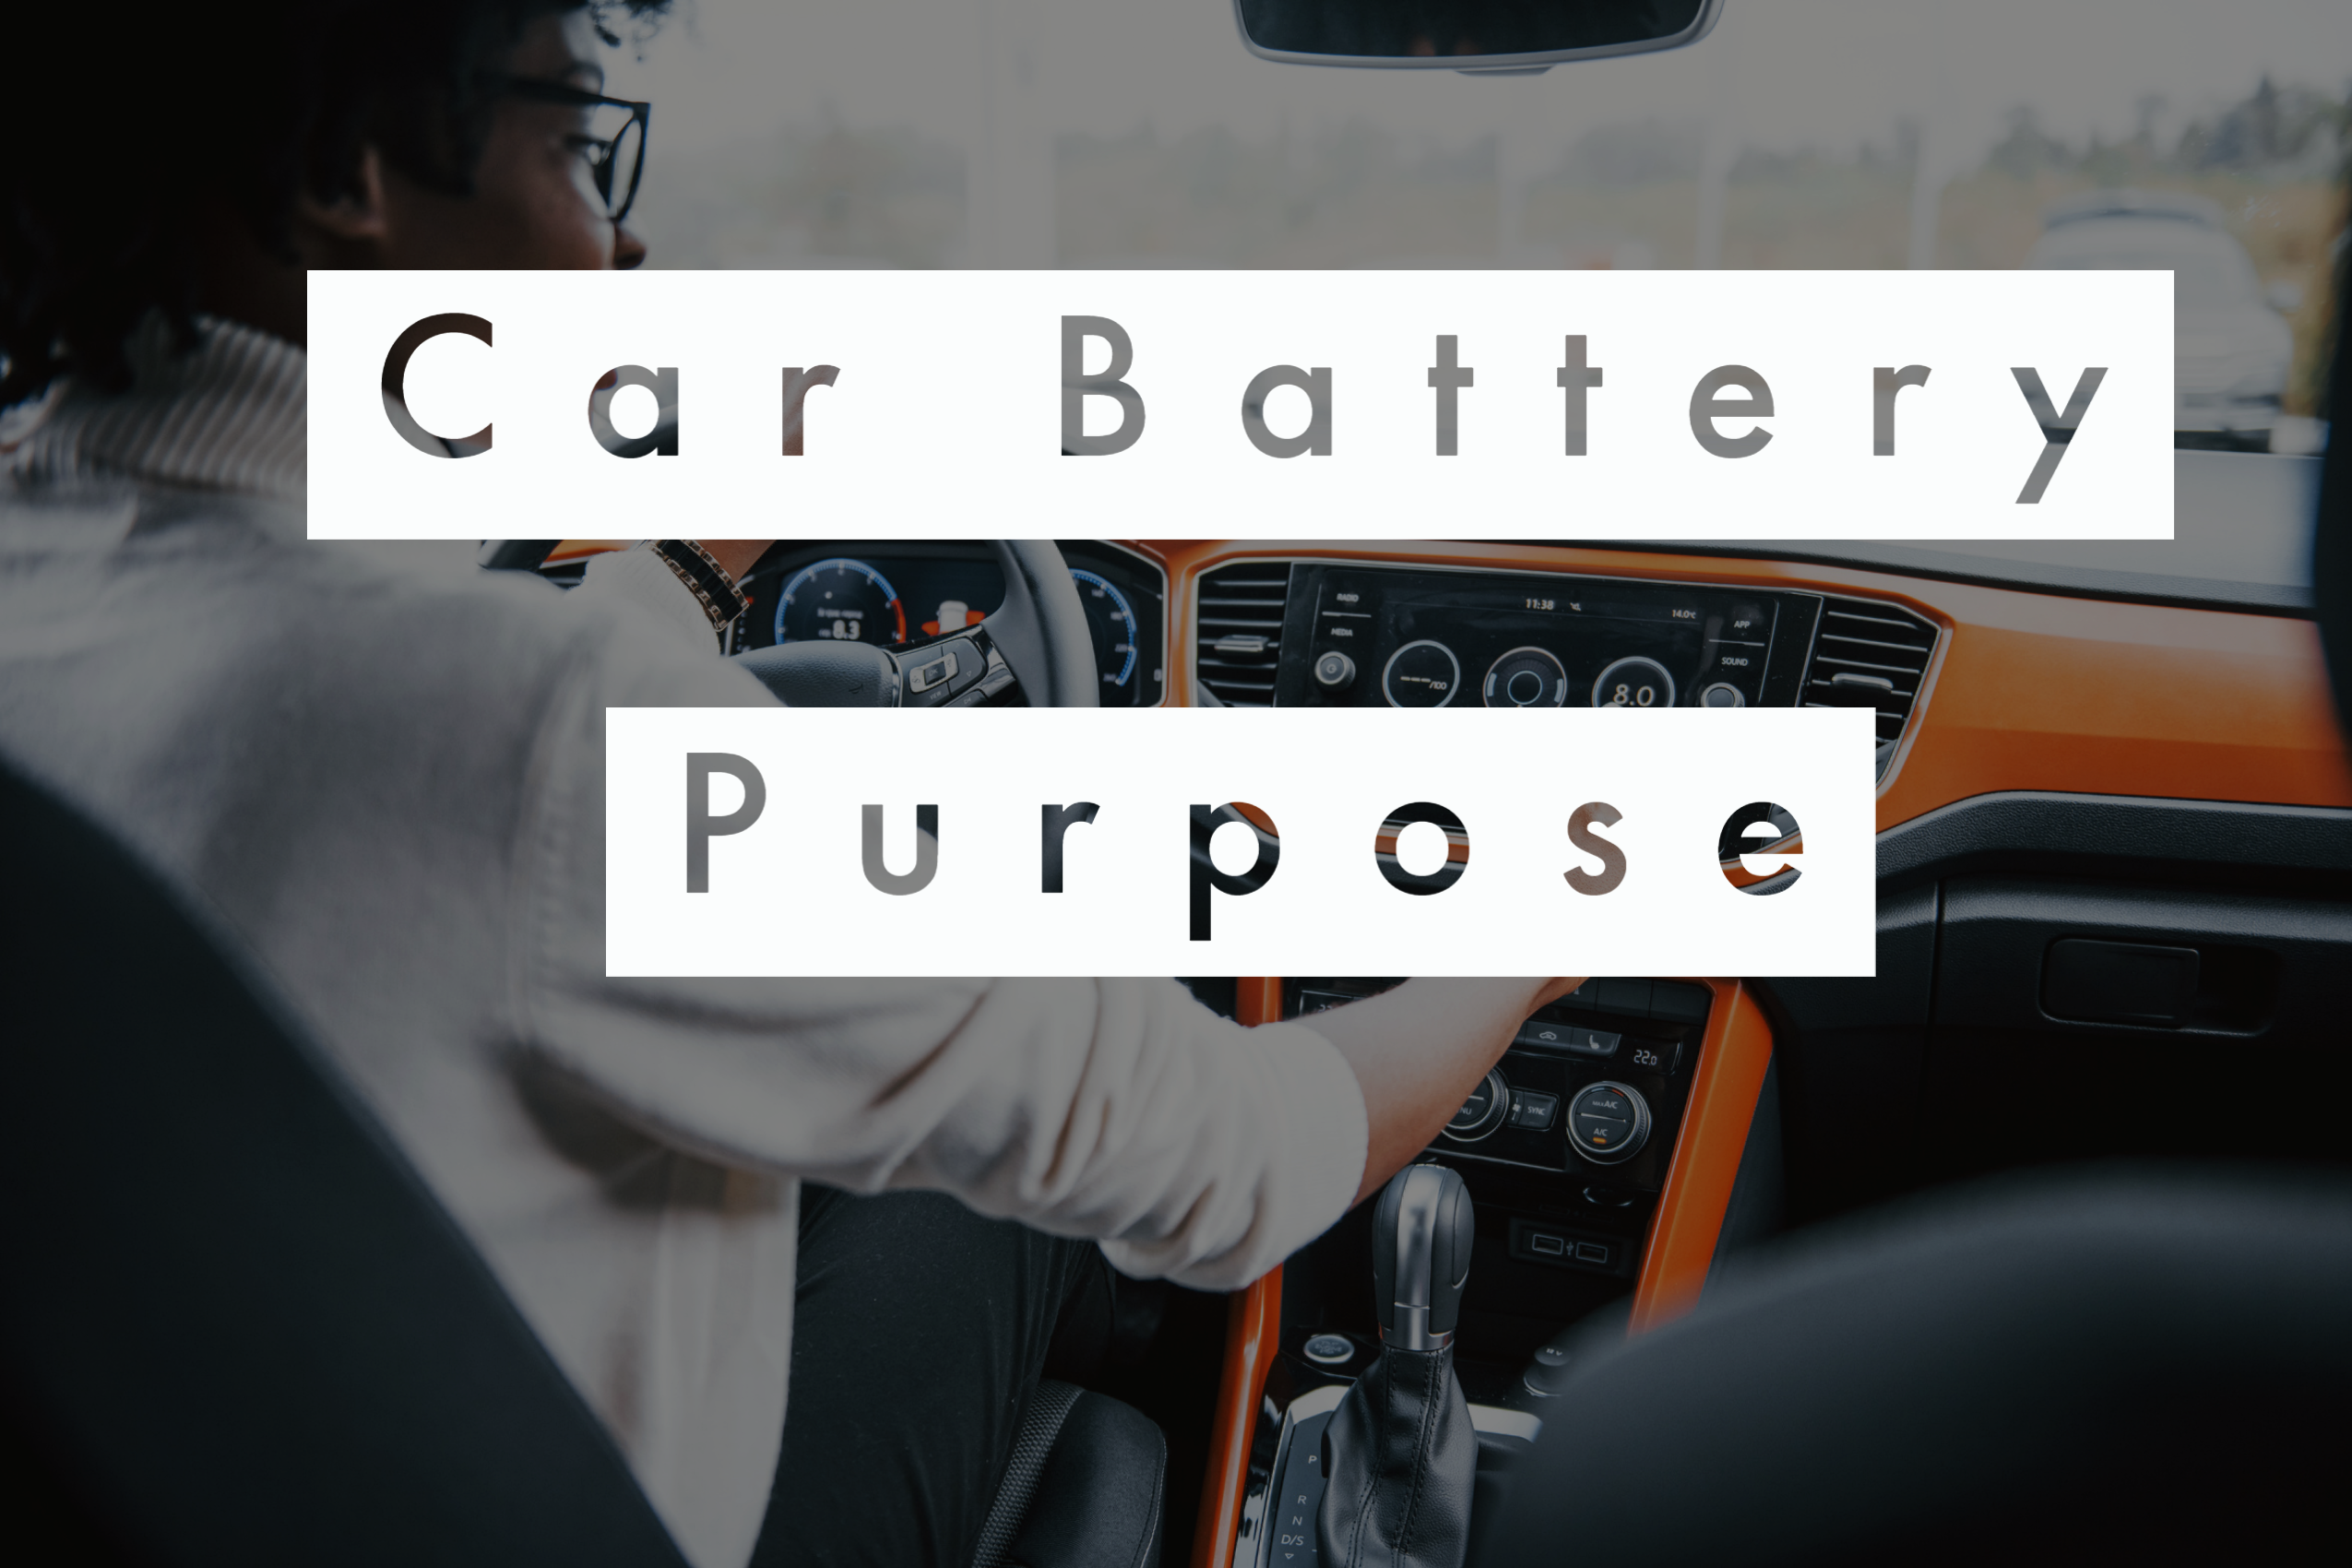 What Is The Purpose Of The Car Battery? And Why Is It Important? To A Vehicle’s Electrical System